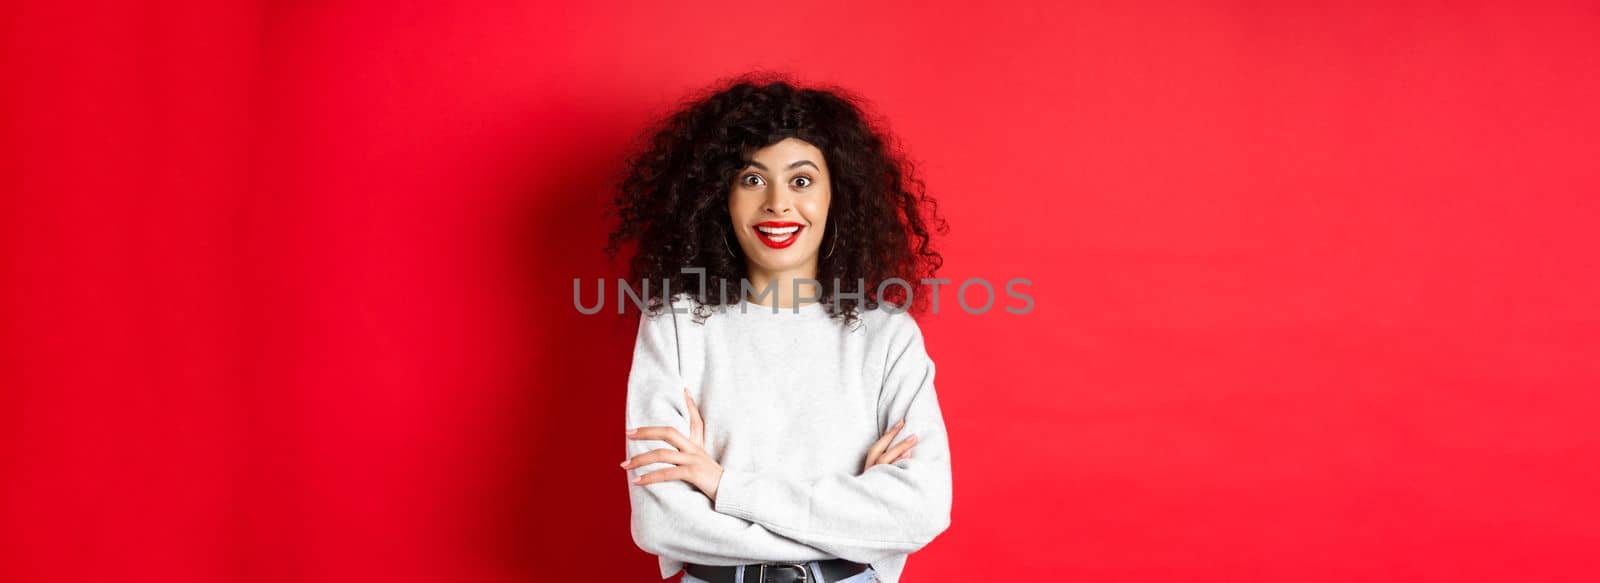 Cheerful young woman with curly hairstyle, raising eyebrows and looking surprised, hear interesting news, red background.